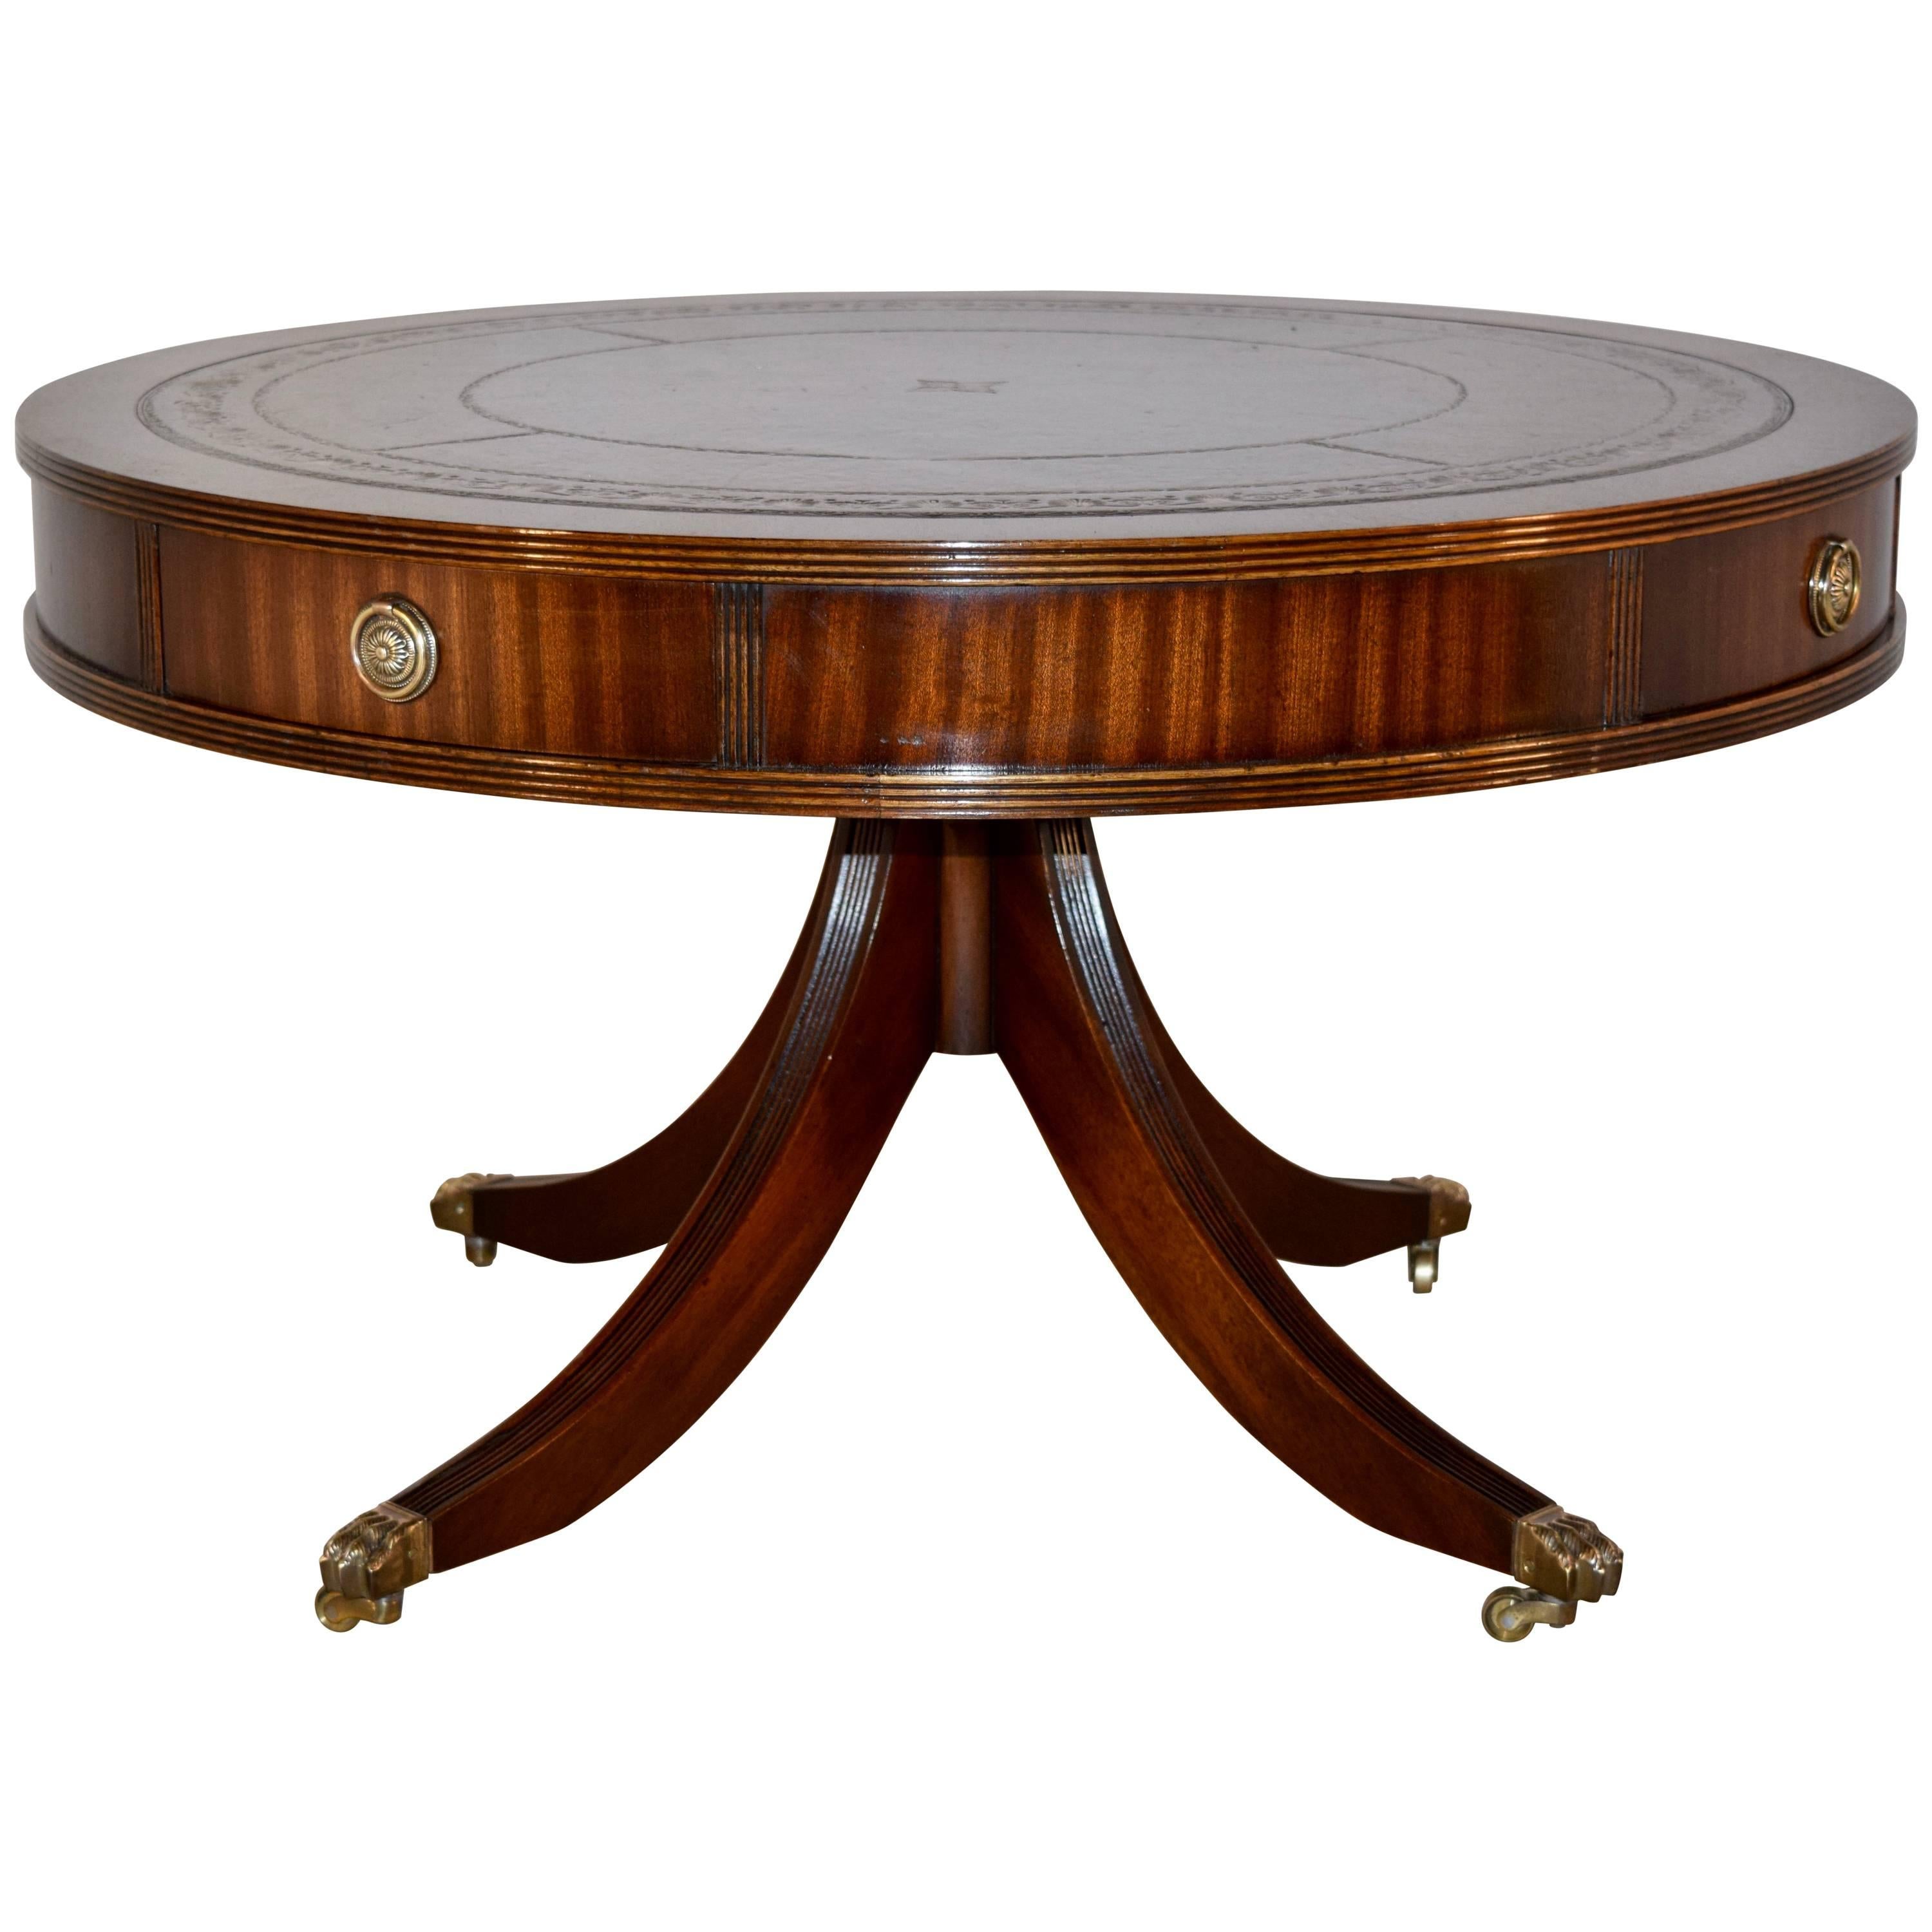 Mahogany Drum Coffee Table with Leather Top